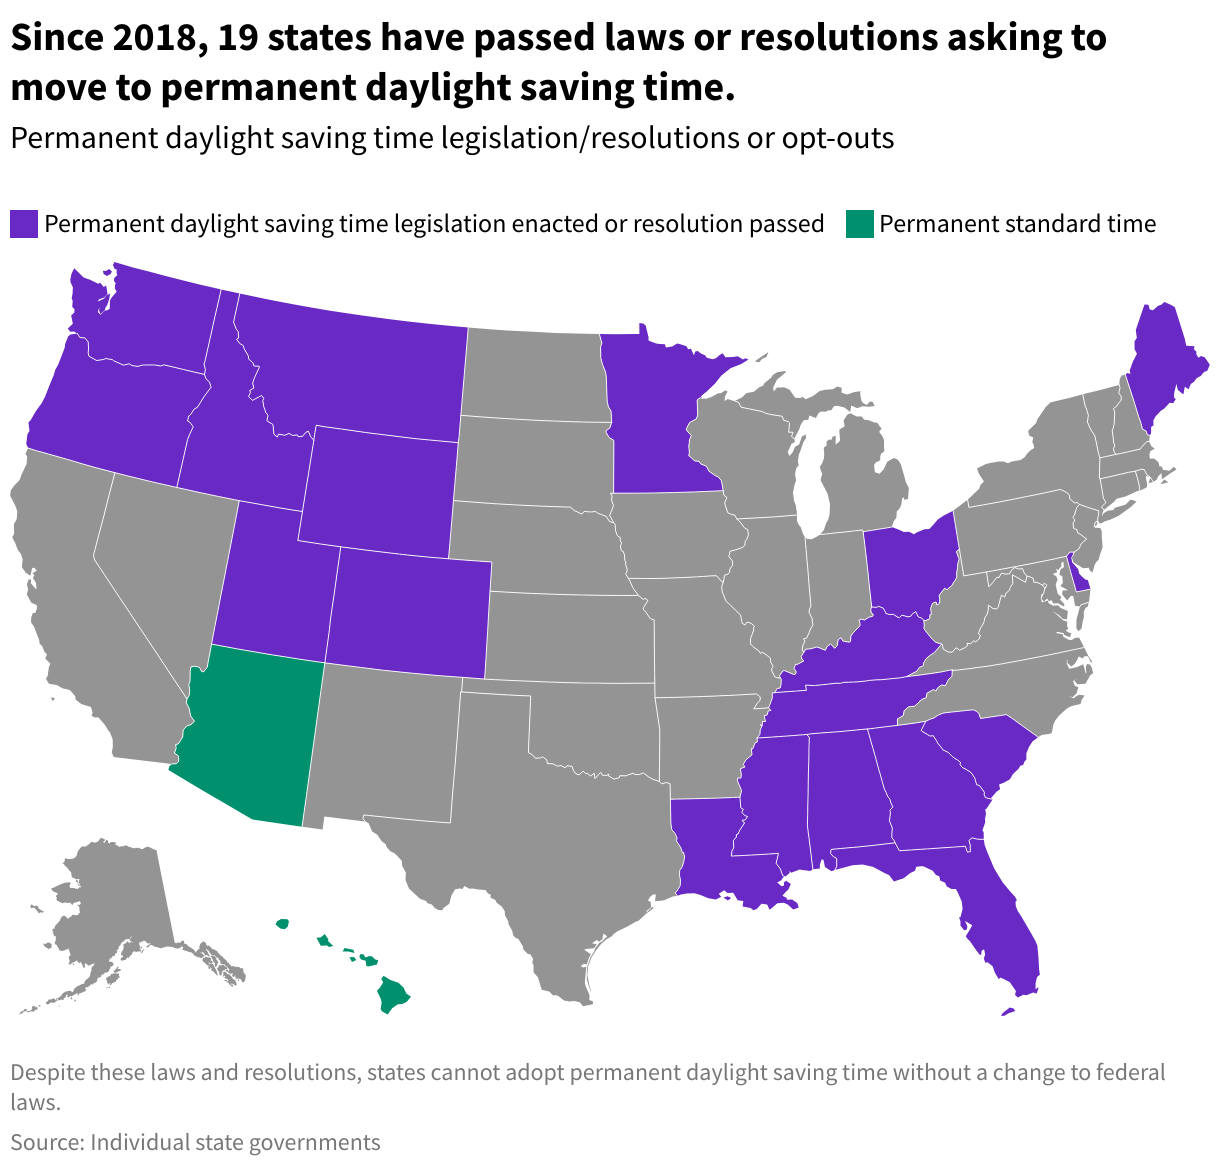 Map of the US showing which states have passed laws asking to move to permanent daylight saving time and which has adopted permanent standard time.